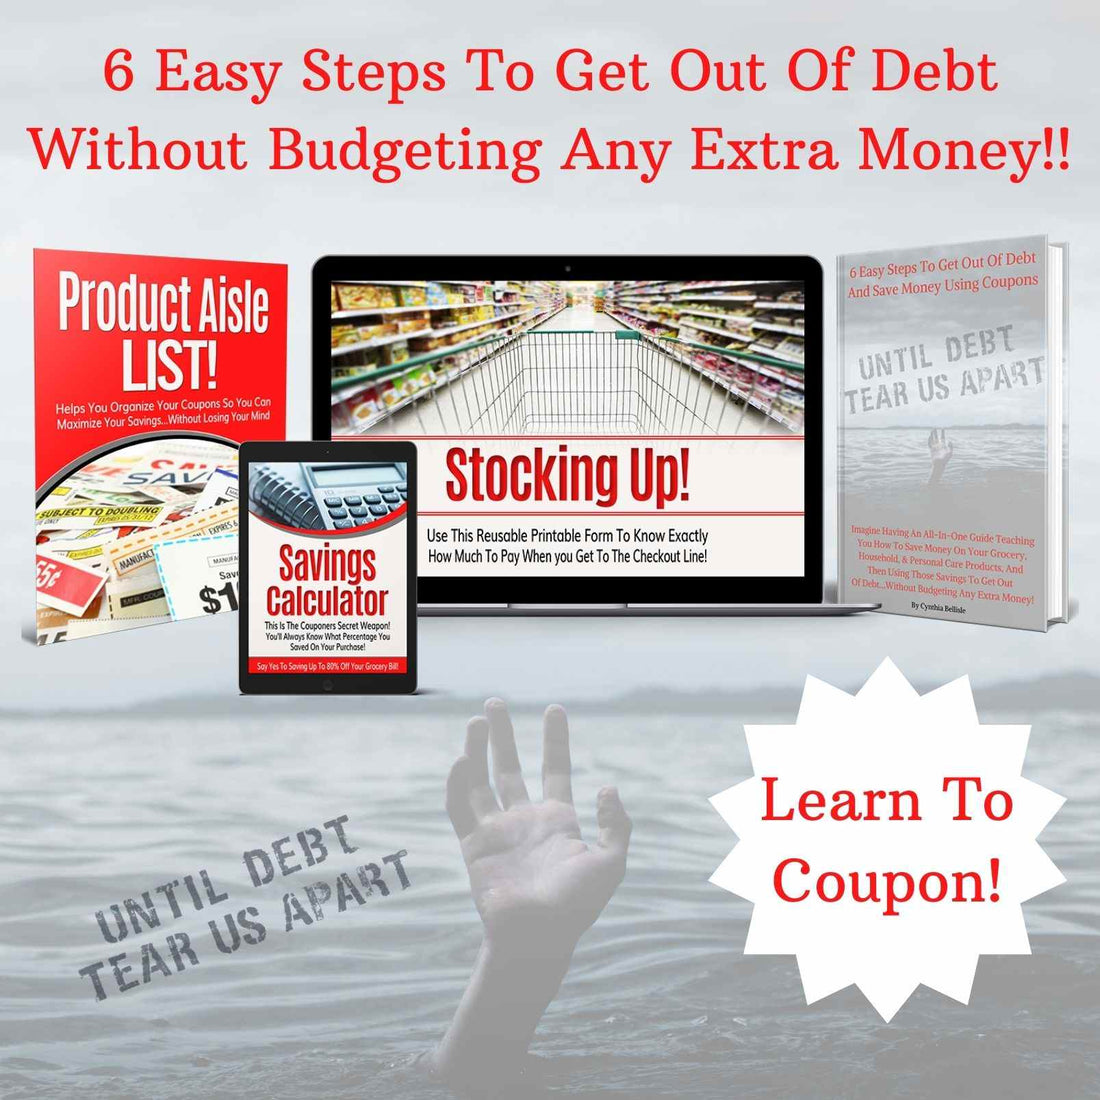 Get Out Of Debt Without Budgeting Any Extra Money